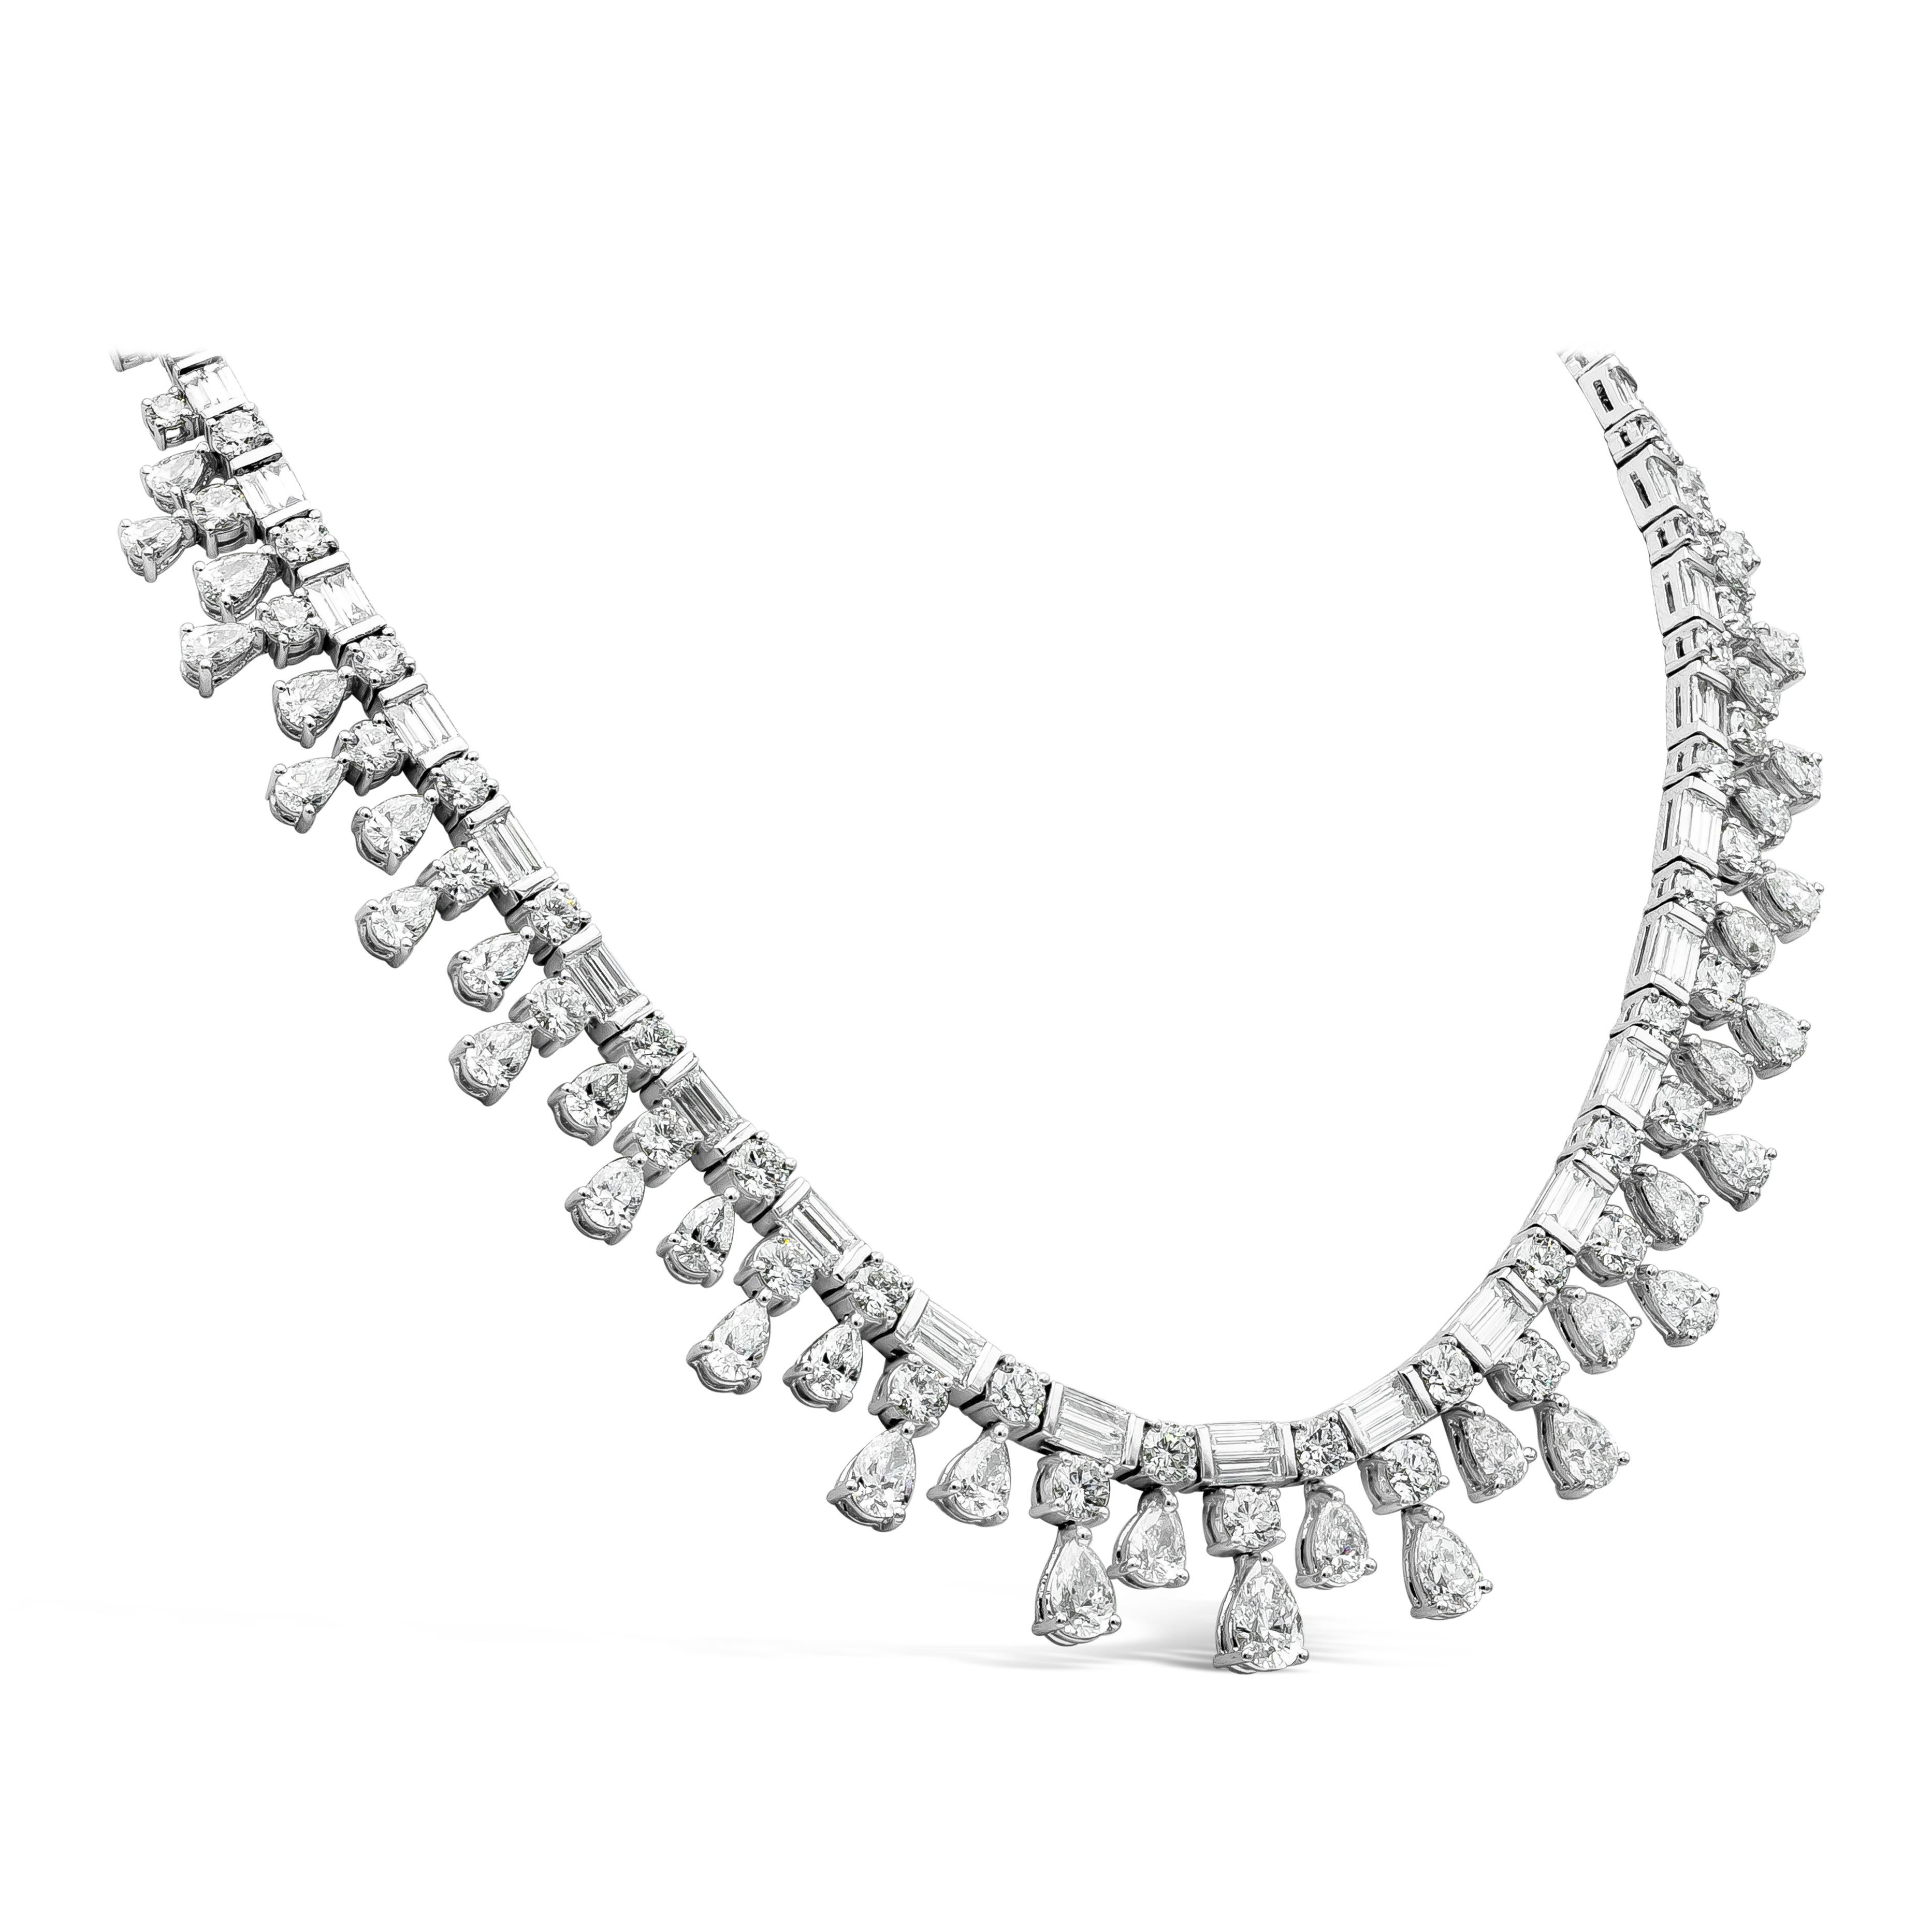 A brilliant and well crafted diamond necklace showcasing a row of alternating baguette and round diamonds in a polished platinum mounting. Pear shape diamond fringes elegantly suspend the line of diamonds. Diamonds weigh 36.28 carats total. Double